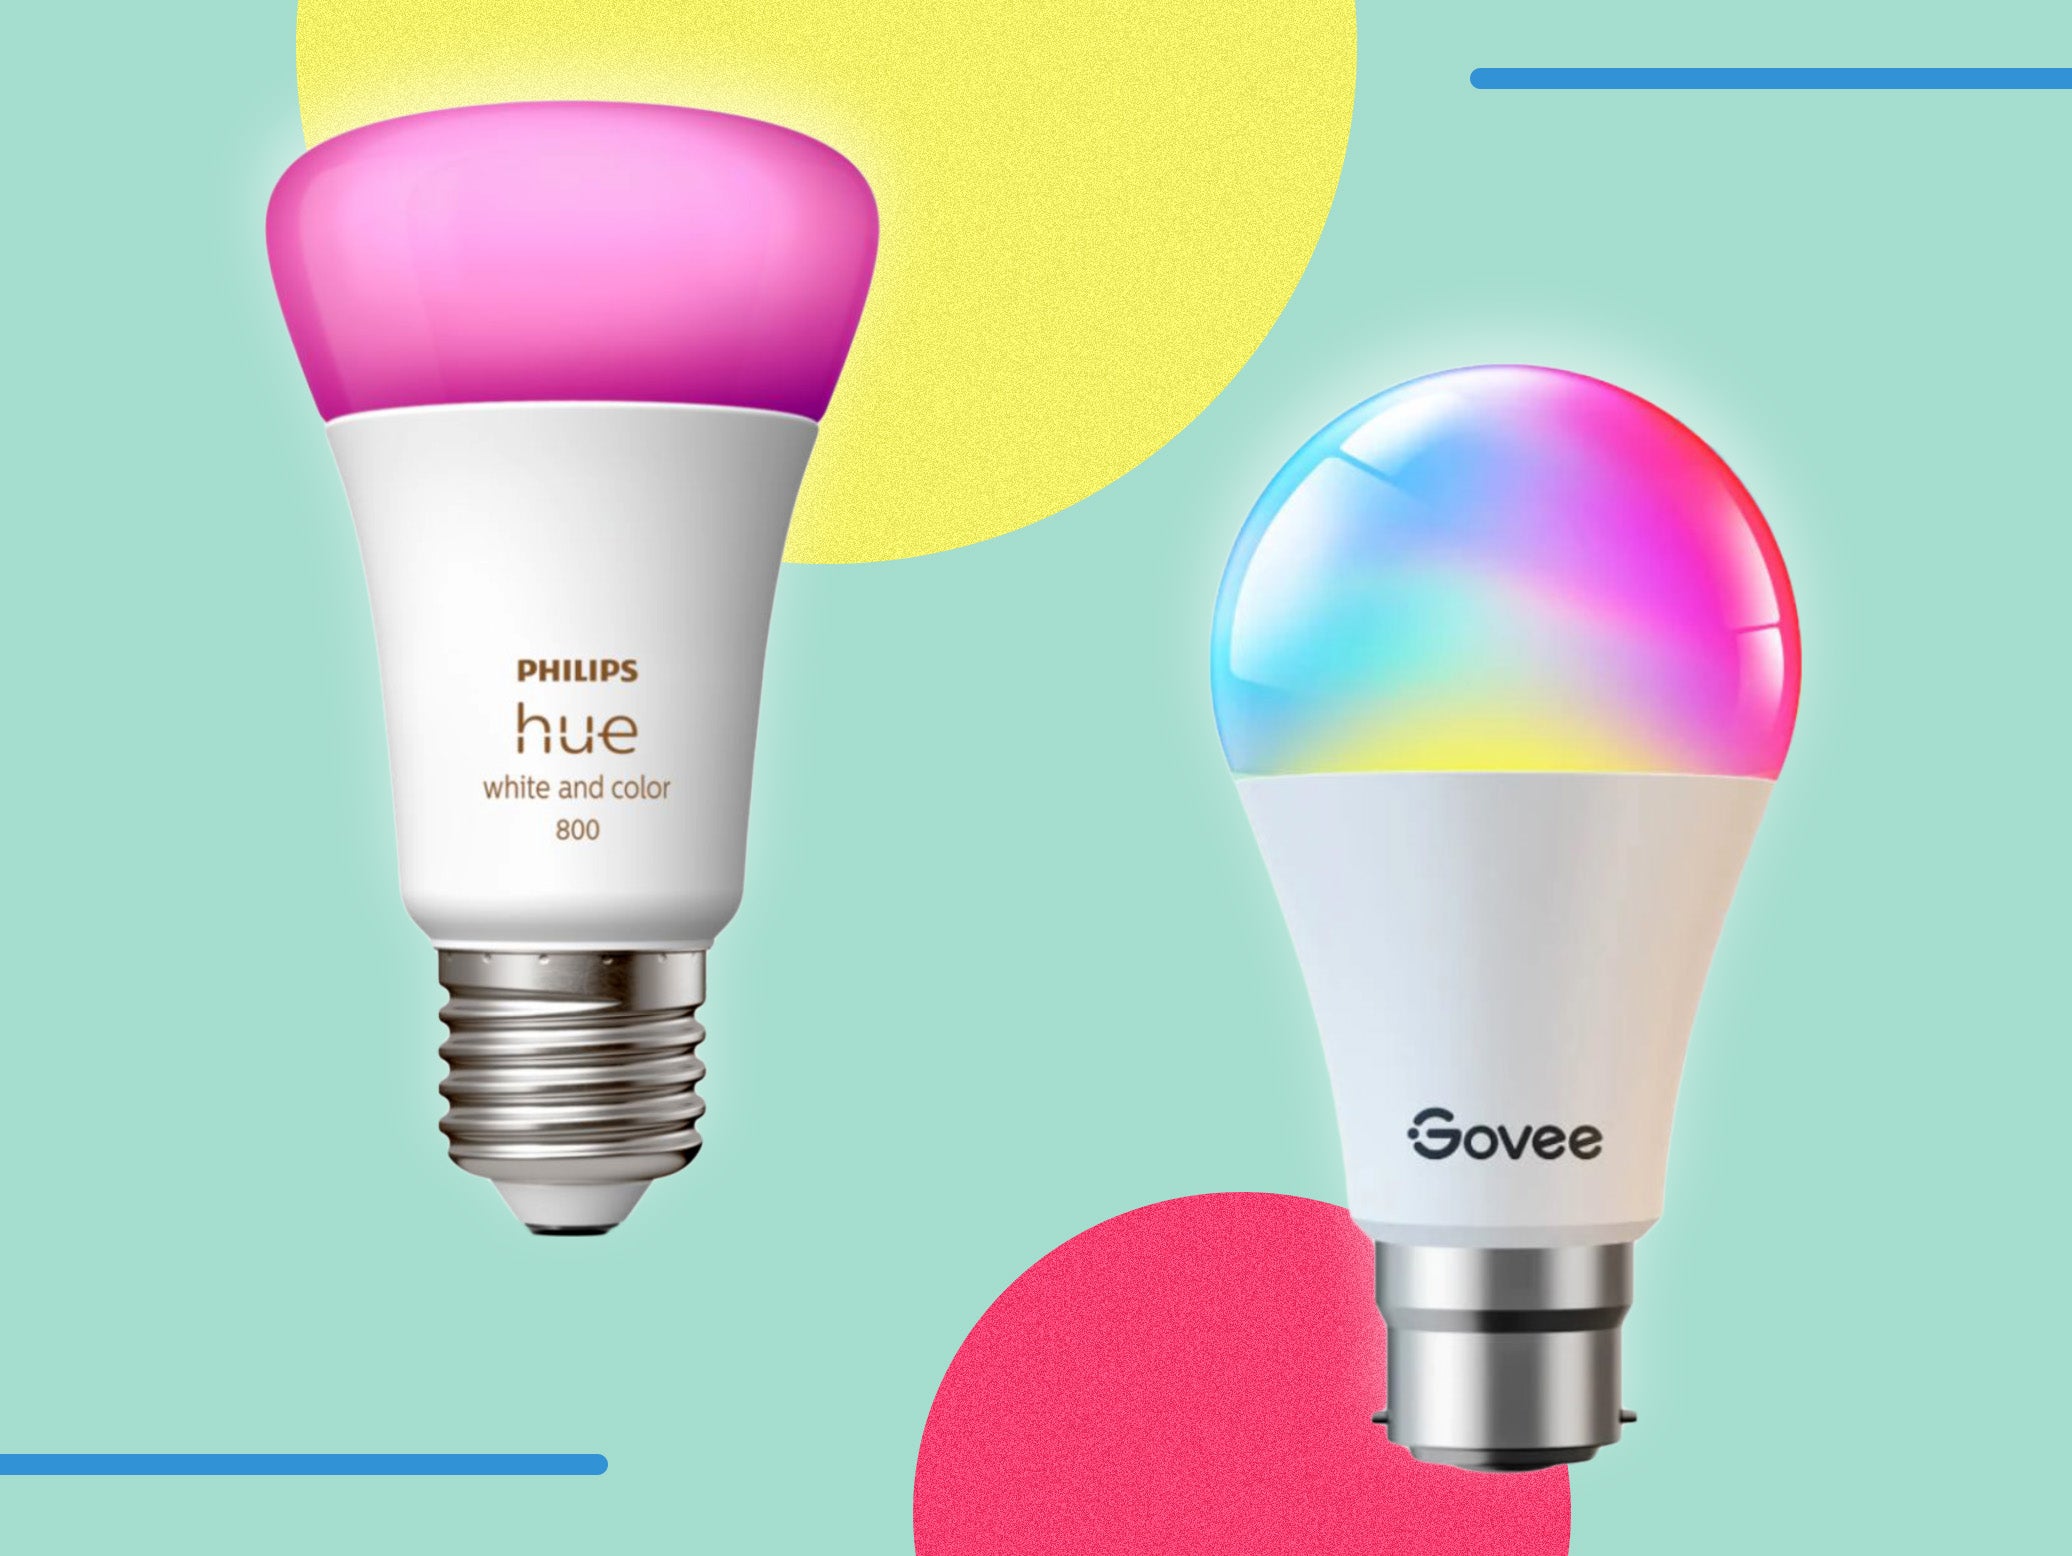 Phillips hue vs Govee: Which is the best smart lighting system for your  home?